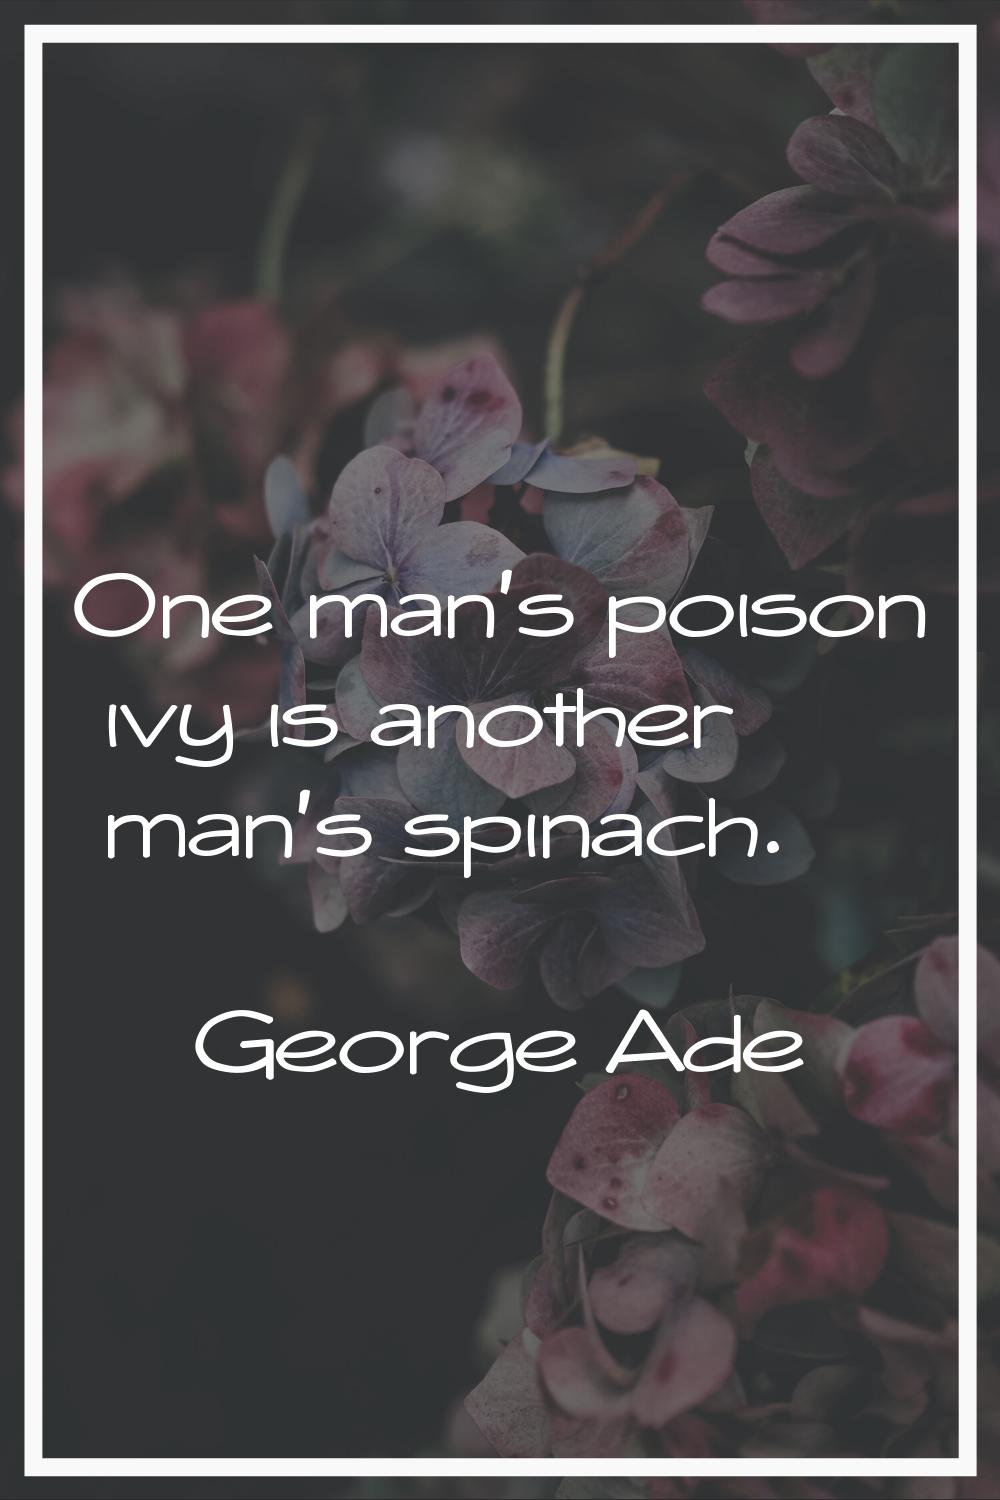 One man's poison ivy is another man's spinach.